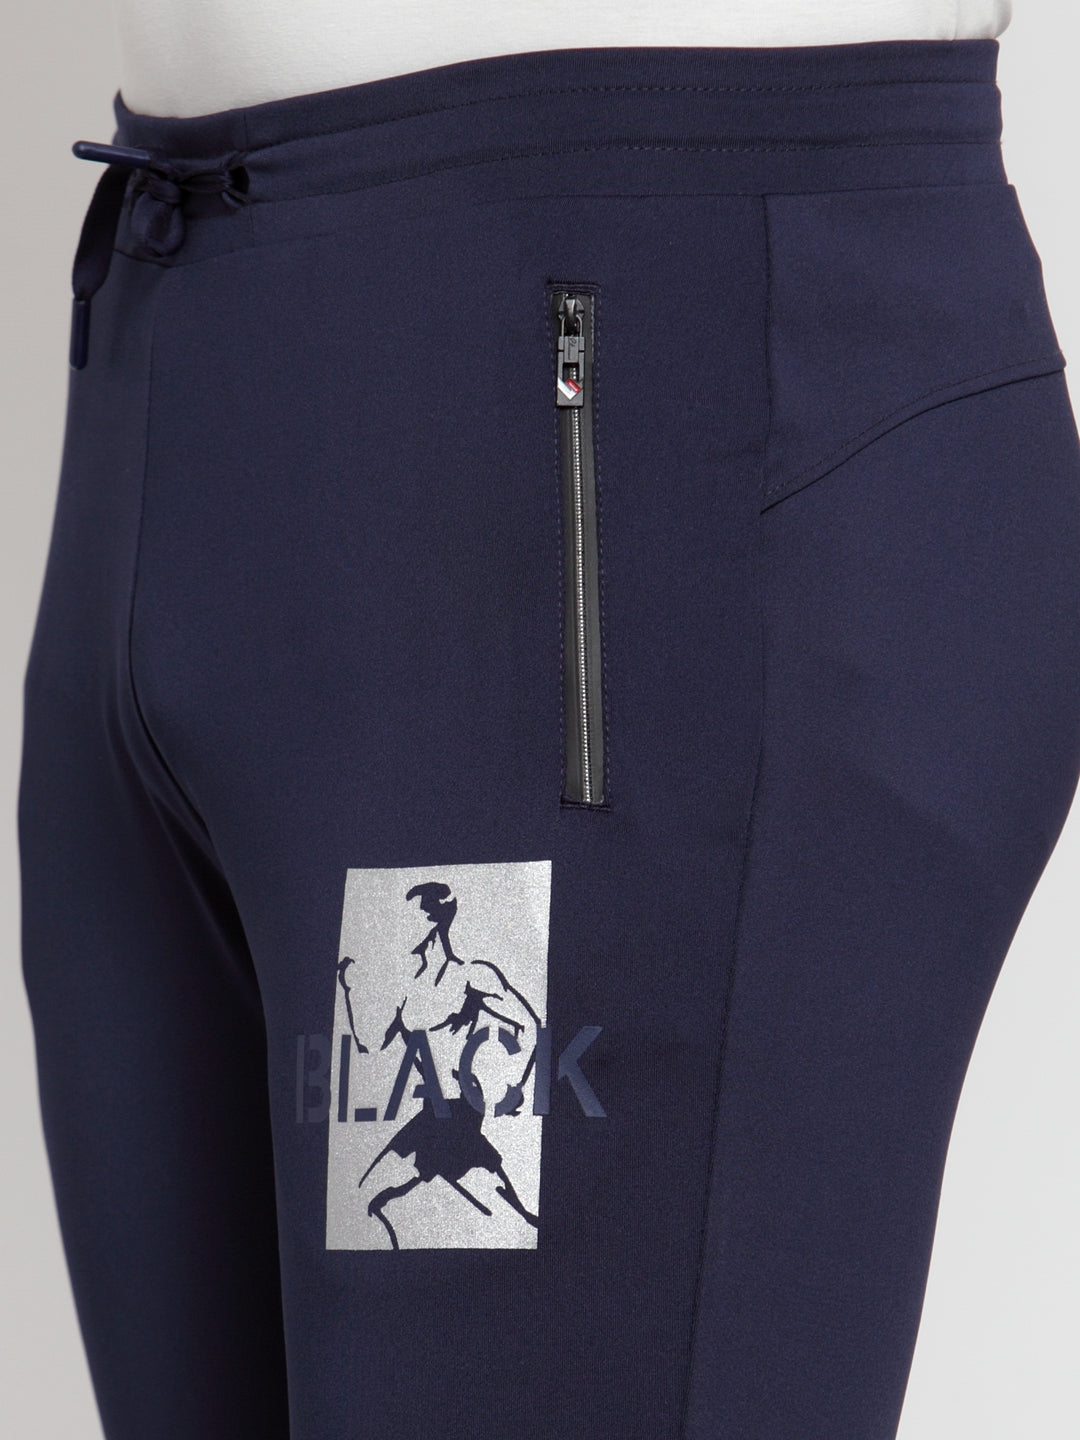 Mens Solid Navy Blue Joggers